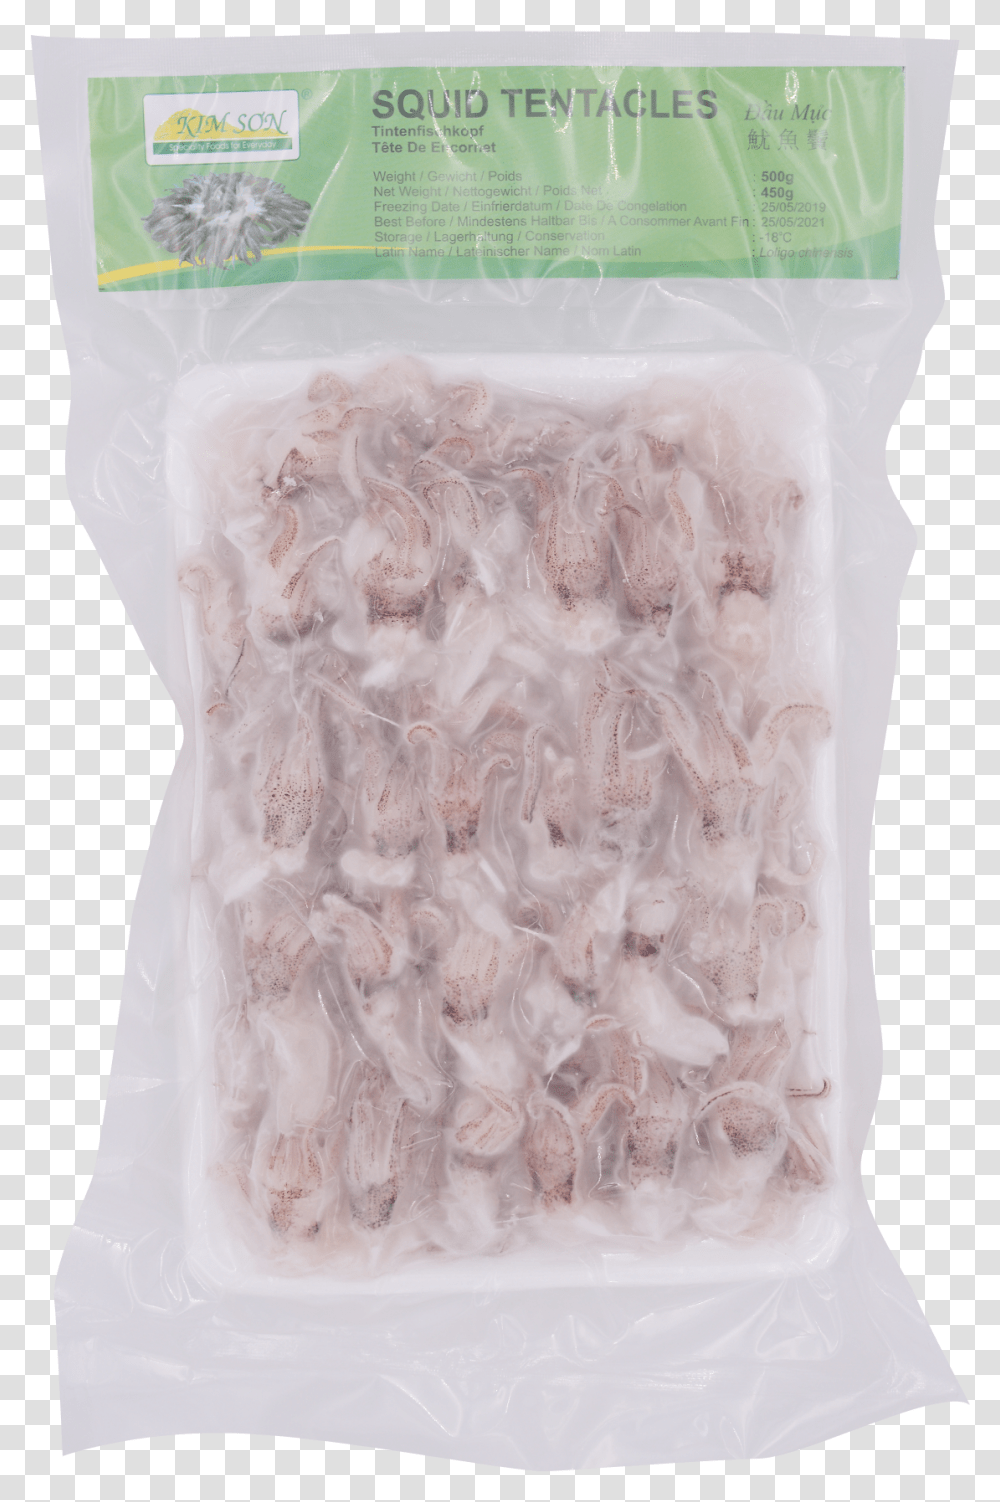 Kim Son Squid Tentacles Iqf 500g Sunflower Seed, Pillow, Cushion, Diaper, Sleeve Transparent Png